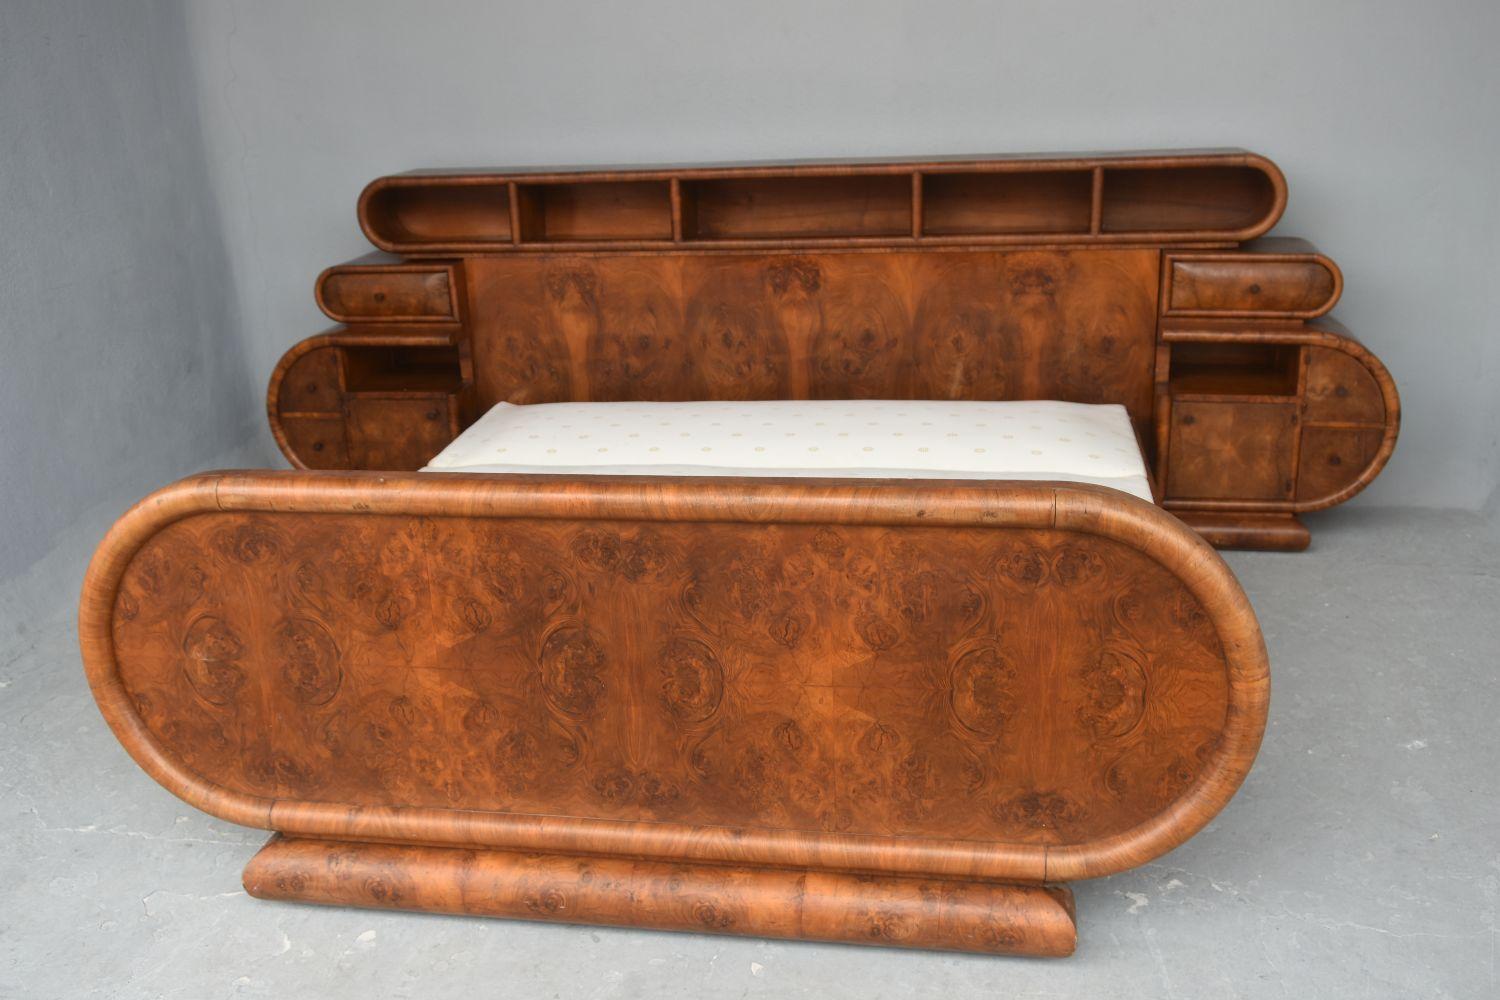 1930s Art Deco Hollywood Bed in Walnut Burl Veneer with its Curved 6